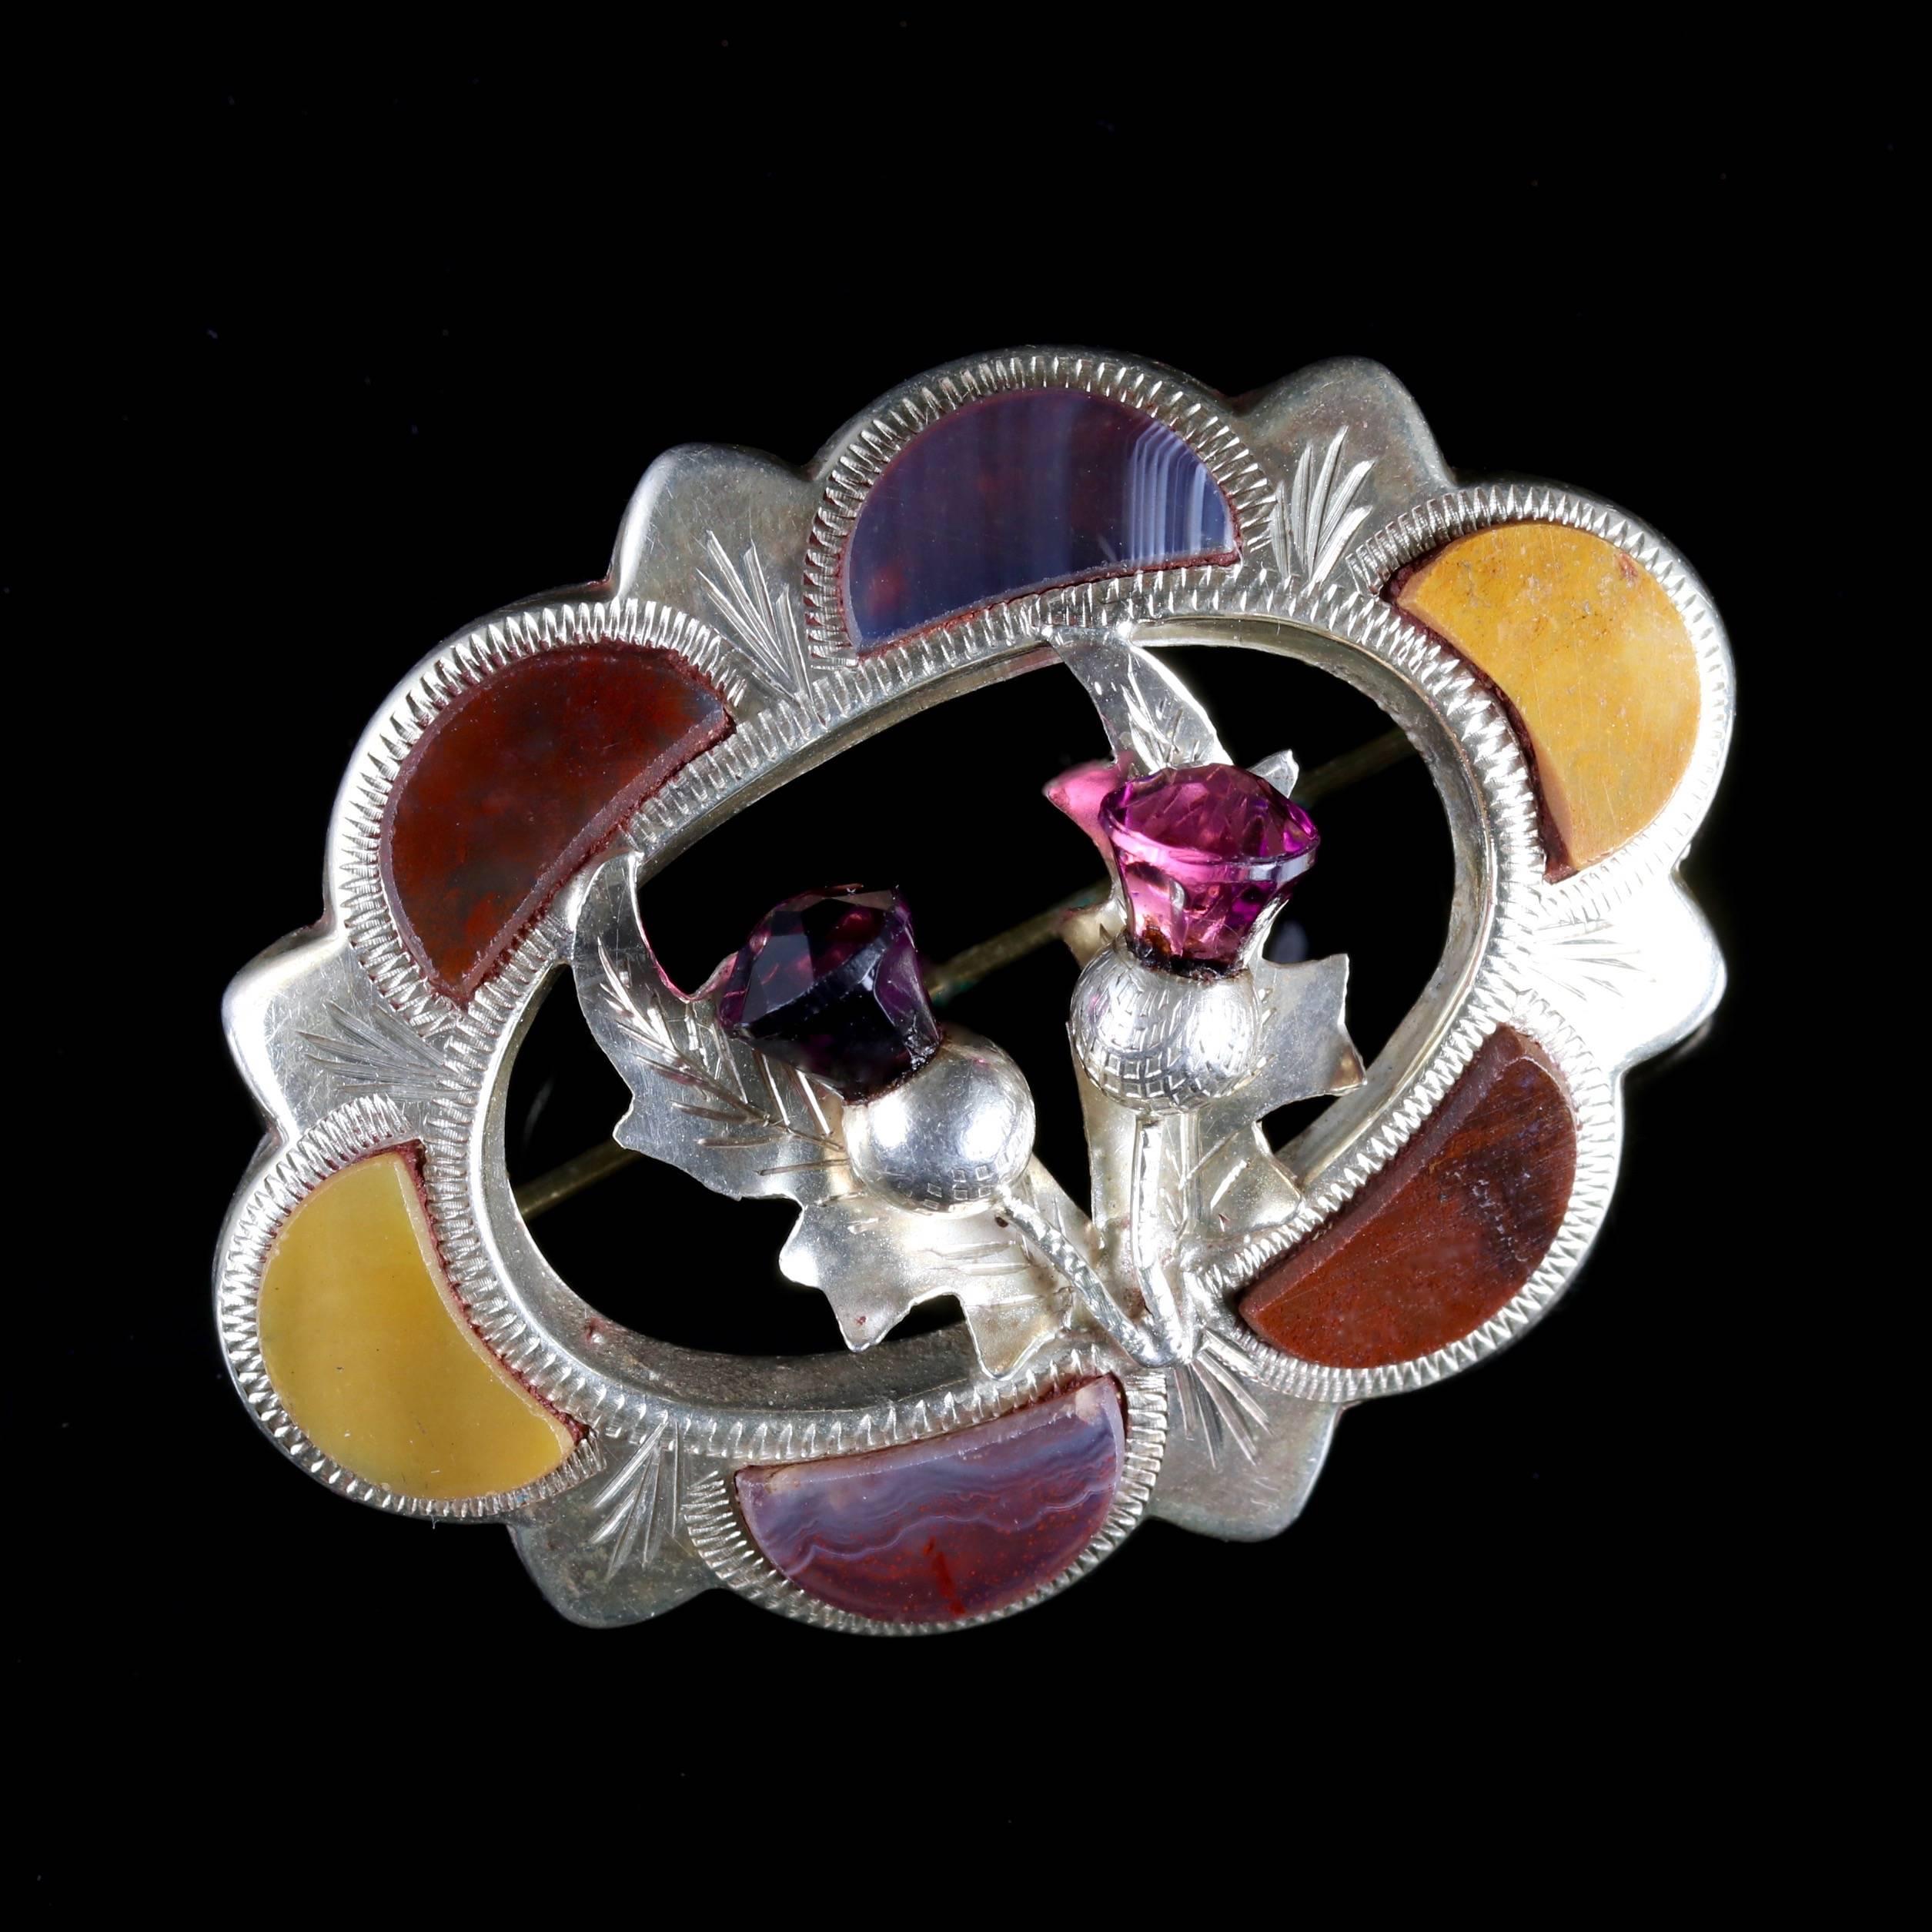 This fabulous Victorian Sterling Silver Scottish brooch is, Circa 1860.

Scottish jewellery was made popular by Queen Victoria as it became a souvenir of her frequent trips to Scotland and her Scottish Castle Balmoral from the mid 1800s. 

Set with